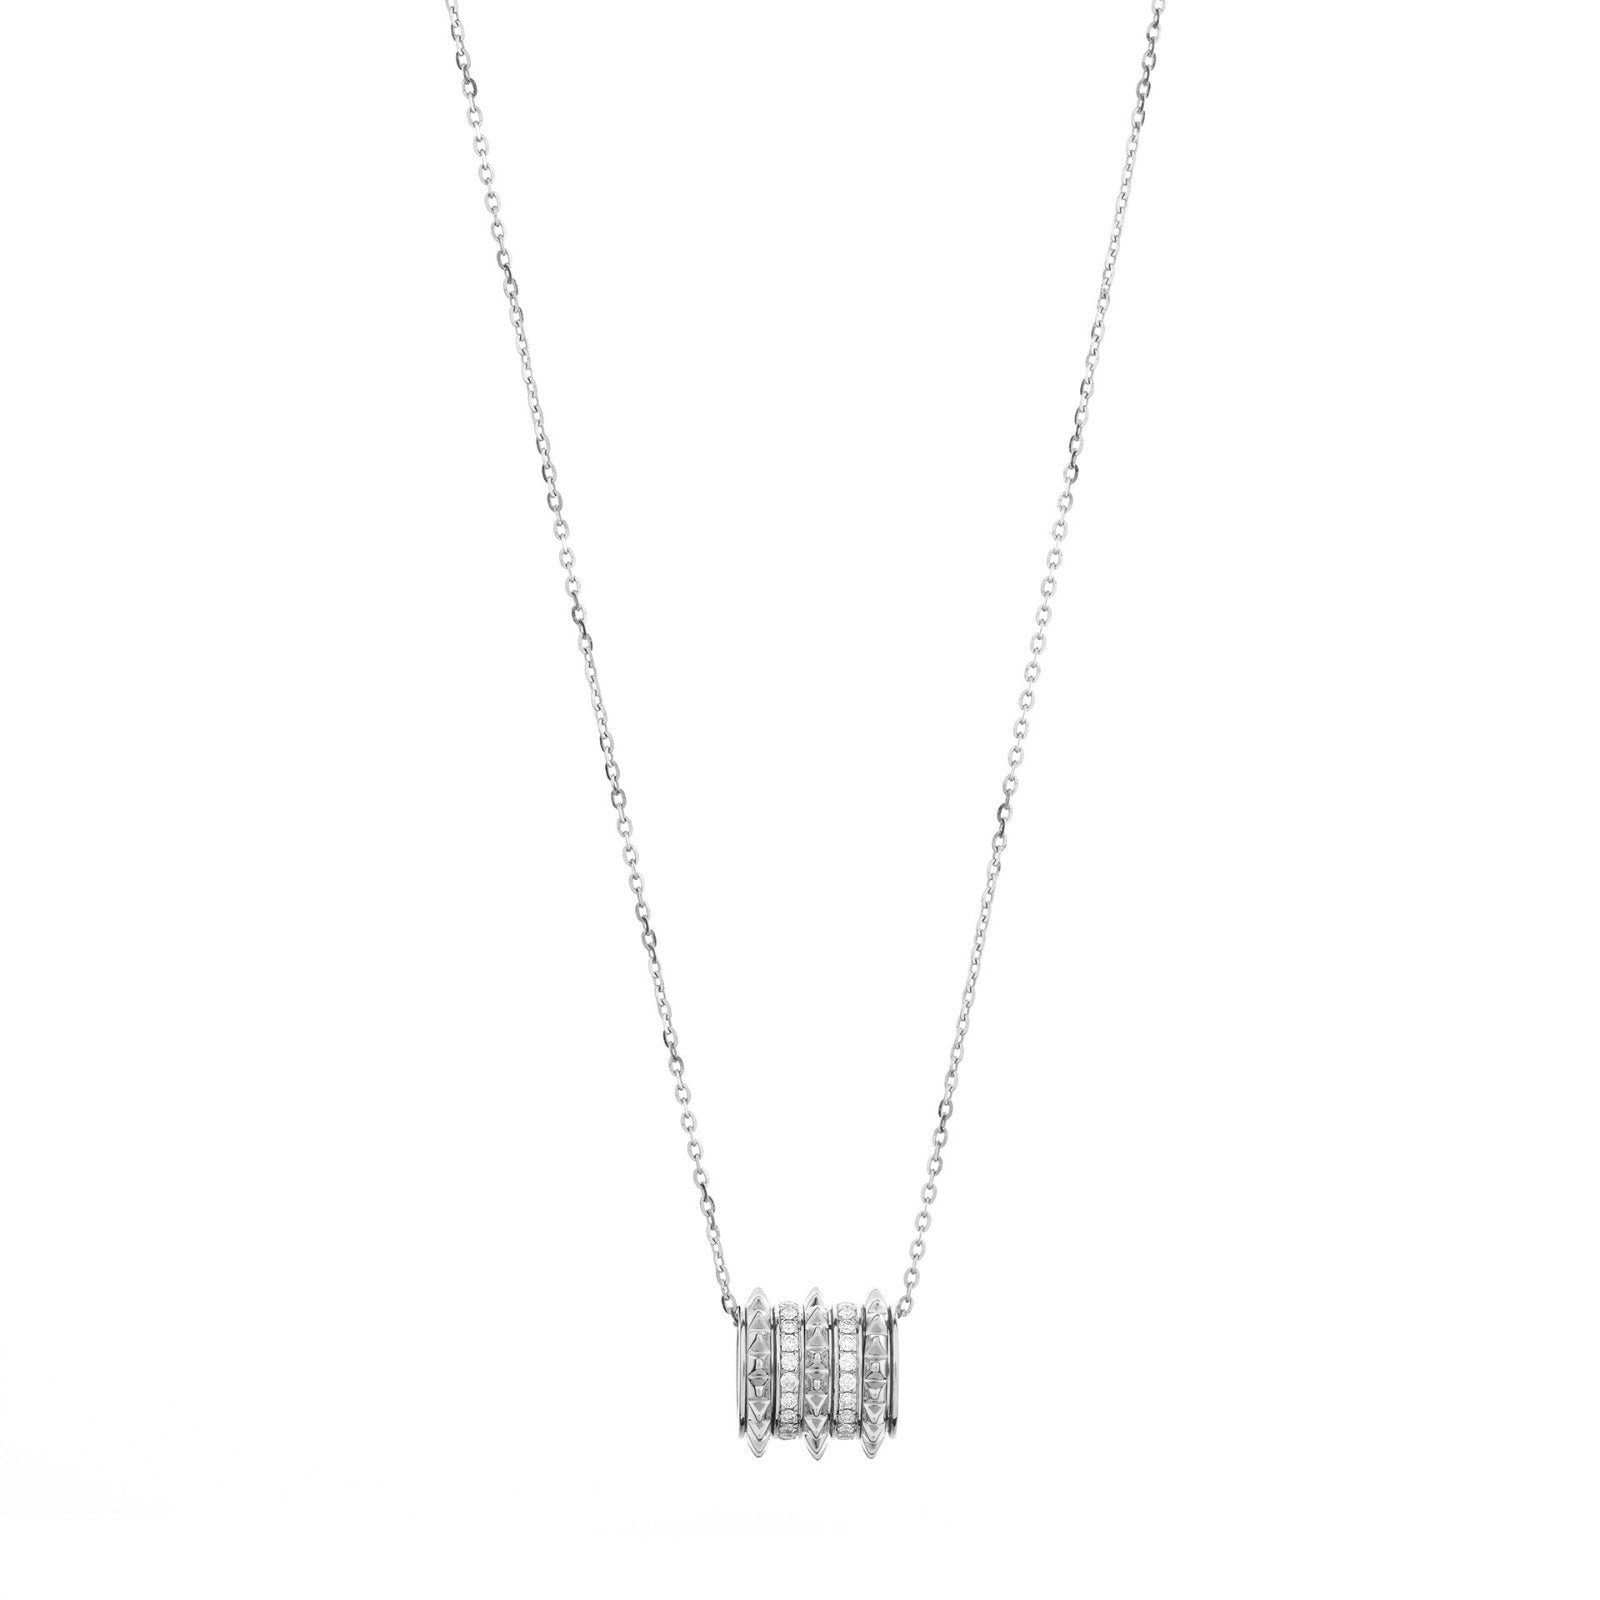 18k Hab El Hayl Evolution Necklace in White Gold with Diamonds